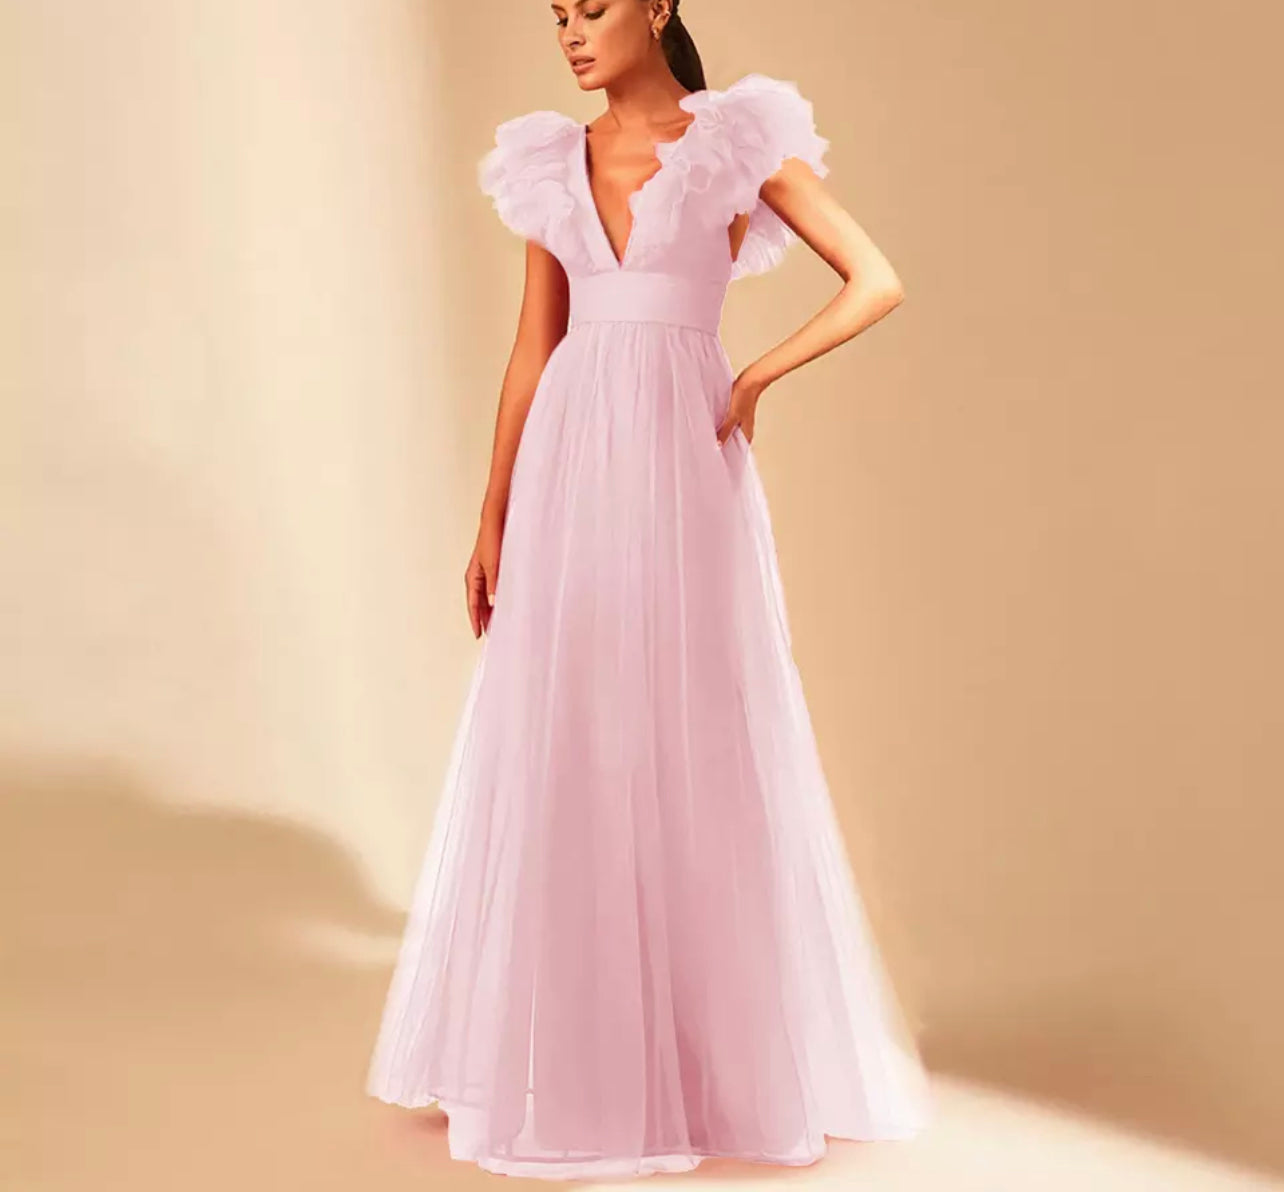 Prom party evening dresses